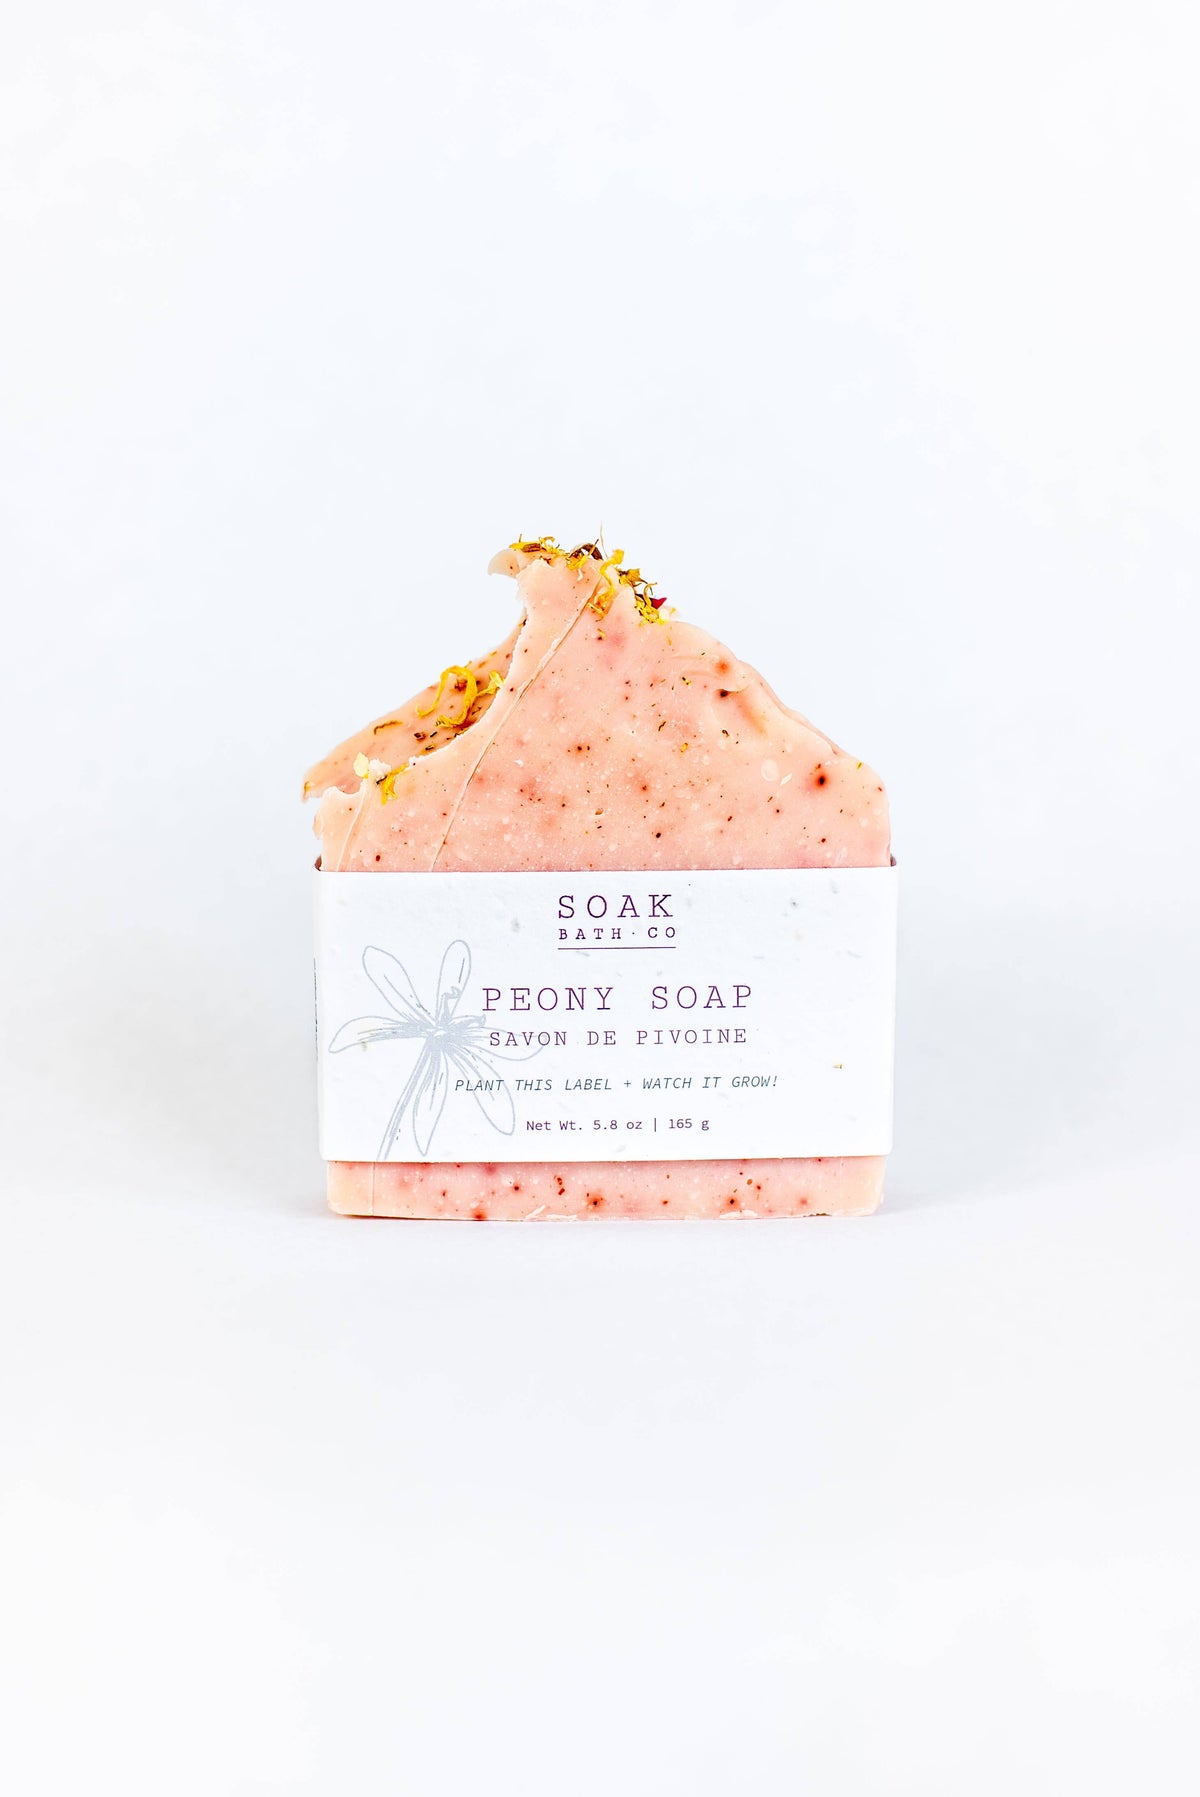 A SOAK Bath Co. - Peony Soap Bar with gold flakes on top, wrapped in plantable seed paper, against a white background. The label features a drawn bow and text describing the product.